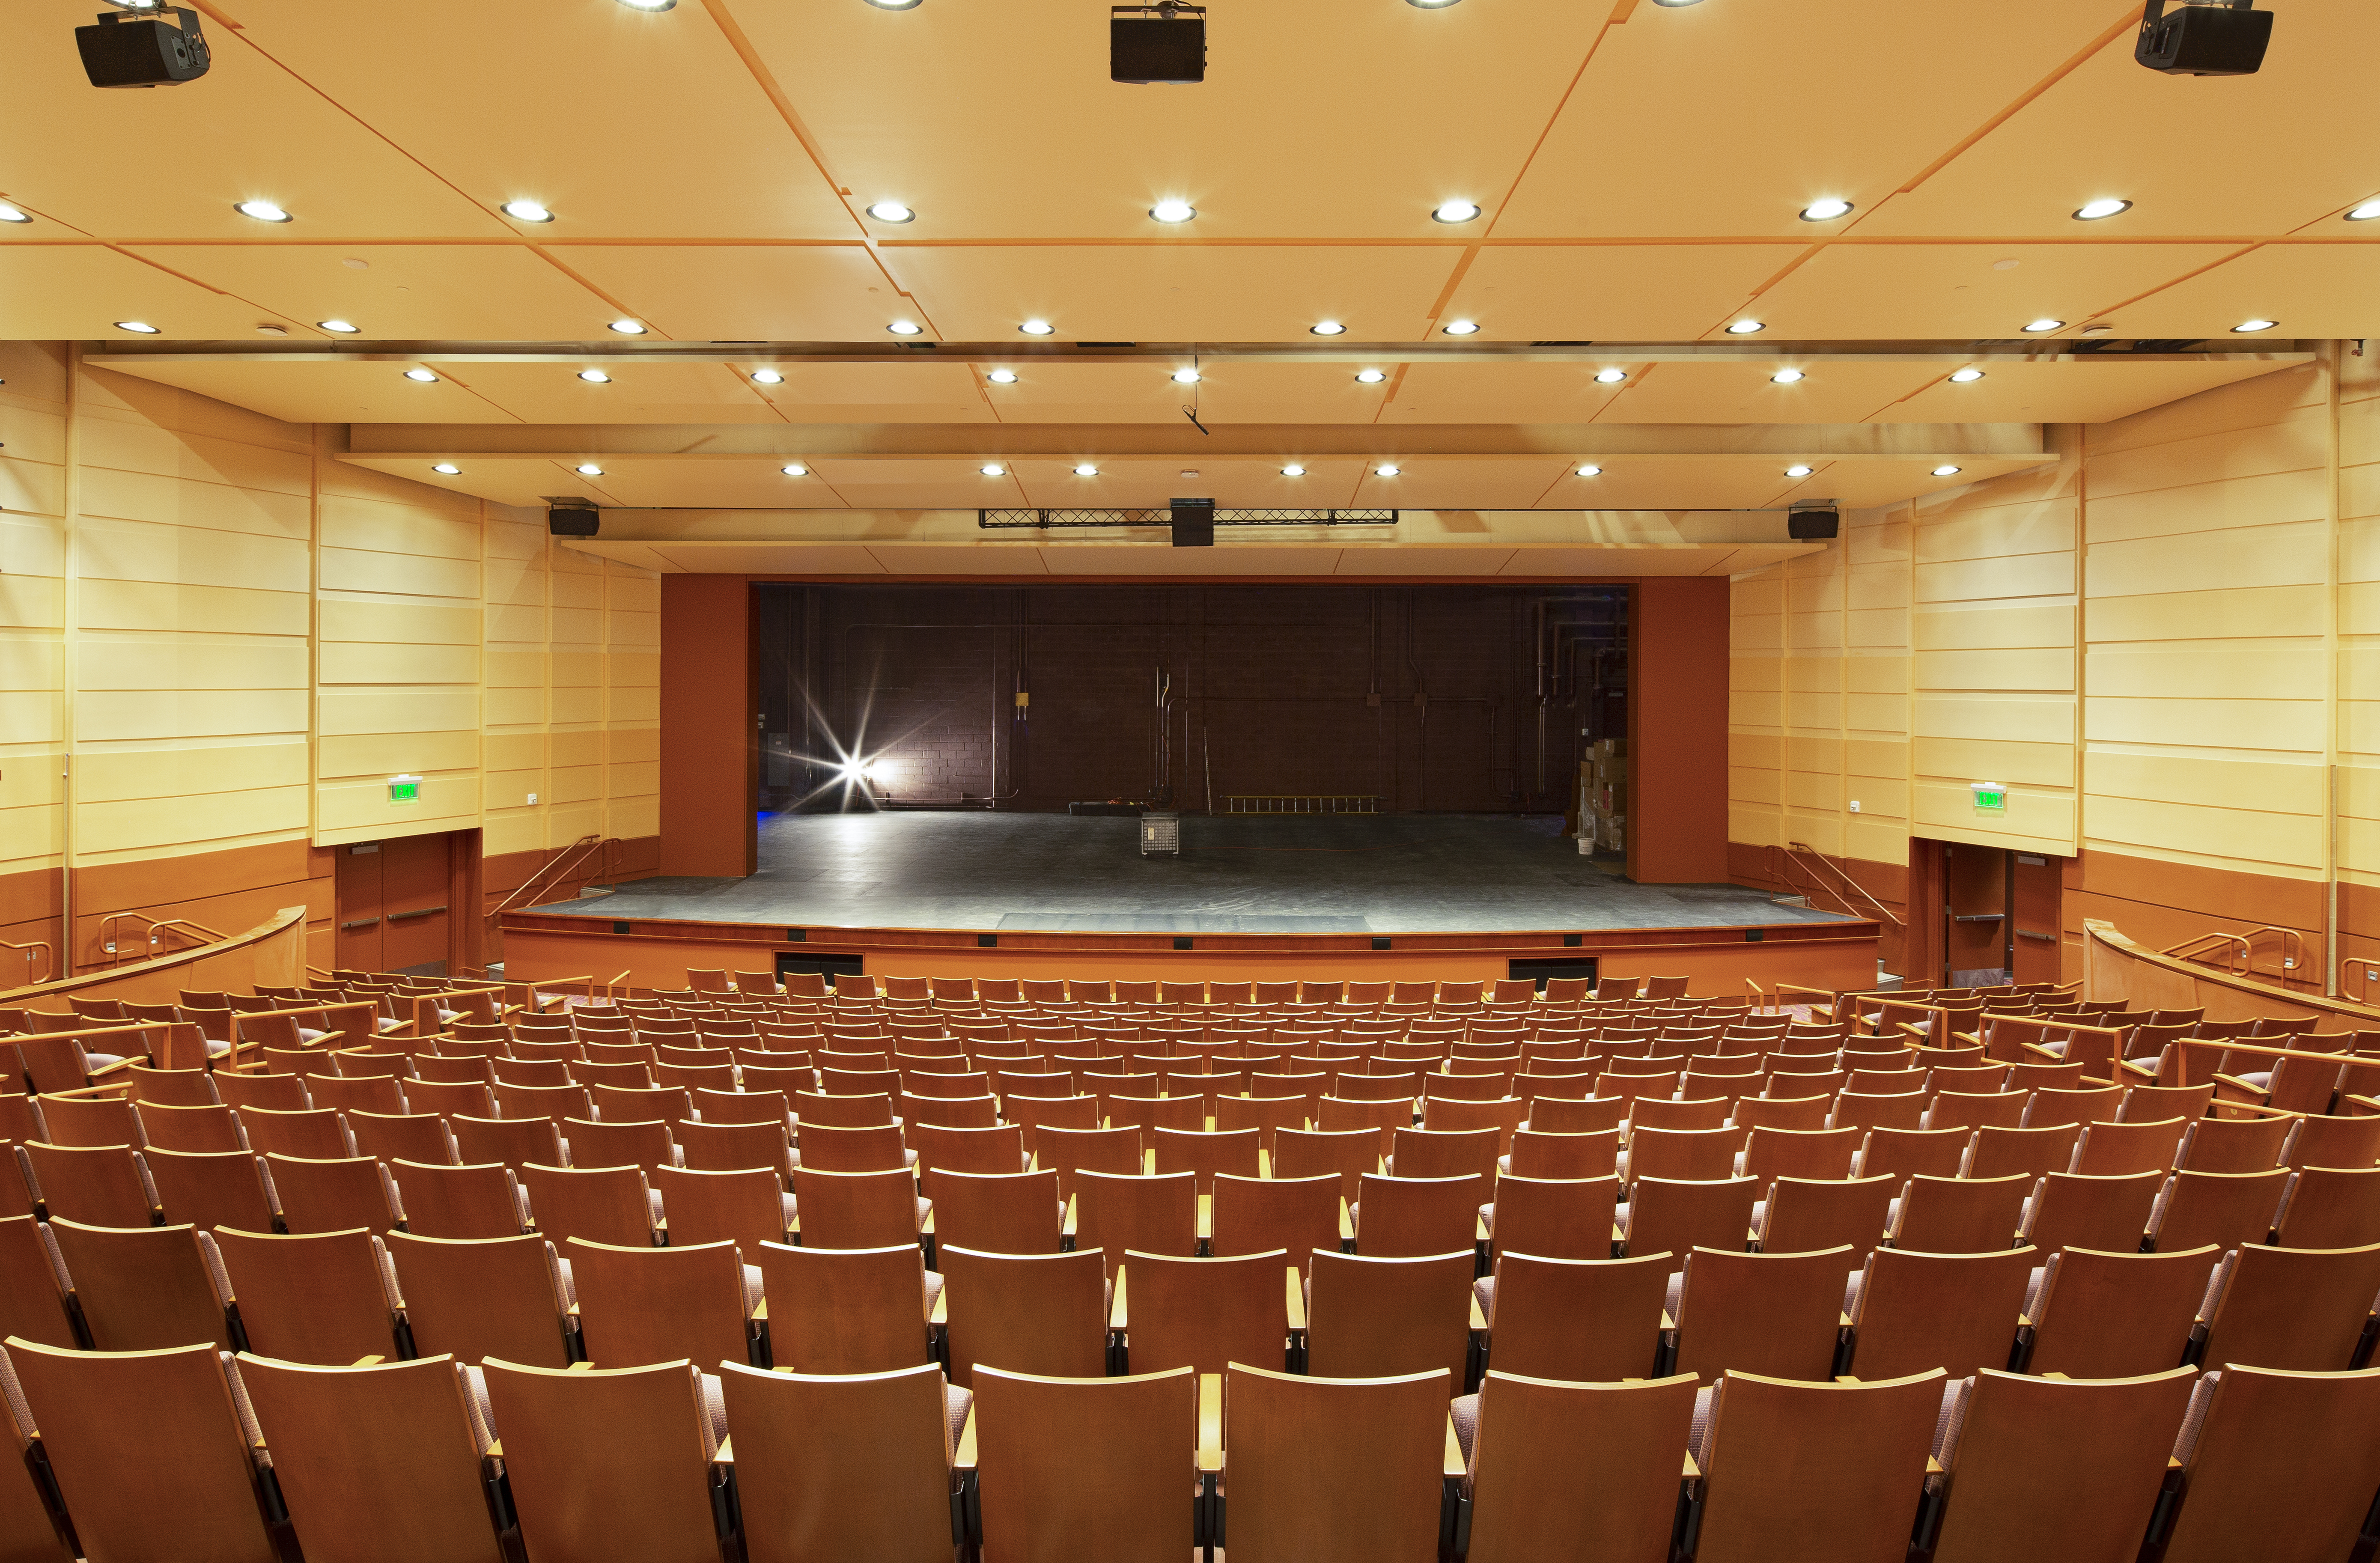 Henry Adams provided the MEP engineering design for the performing arts center